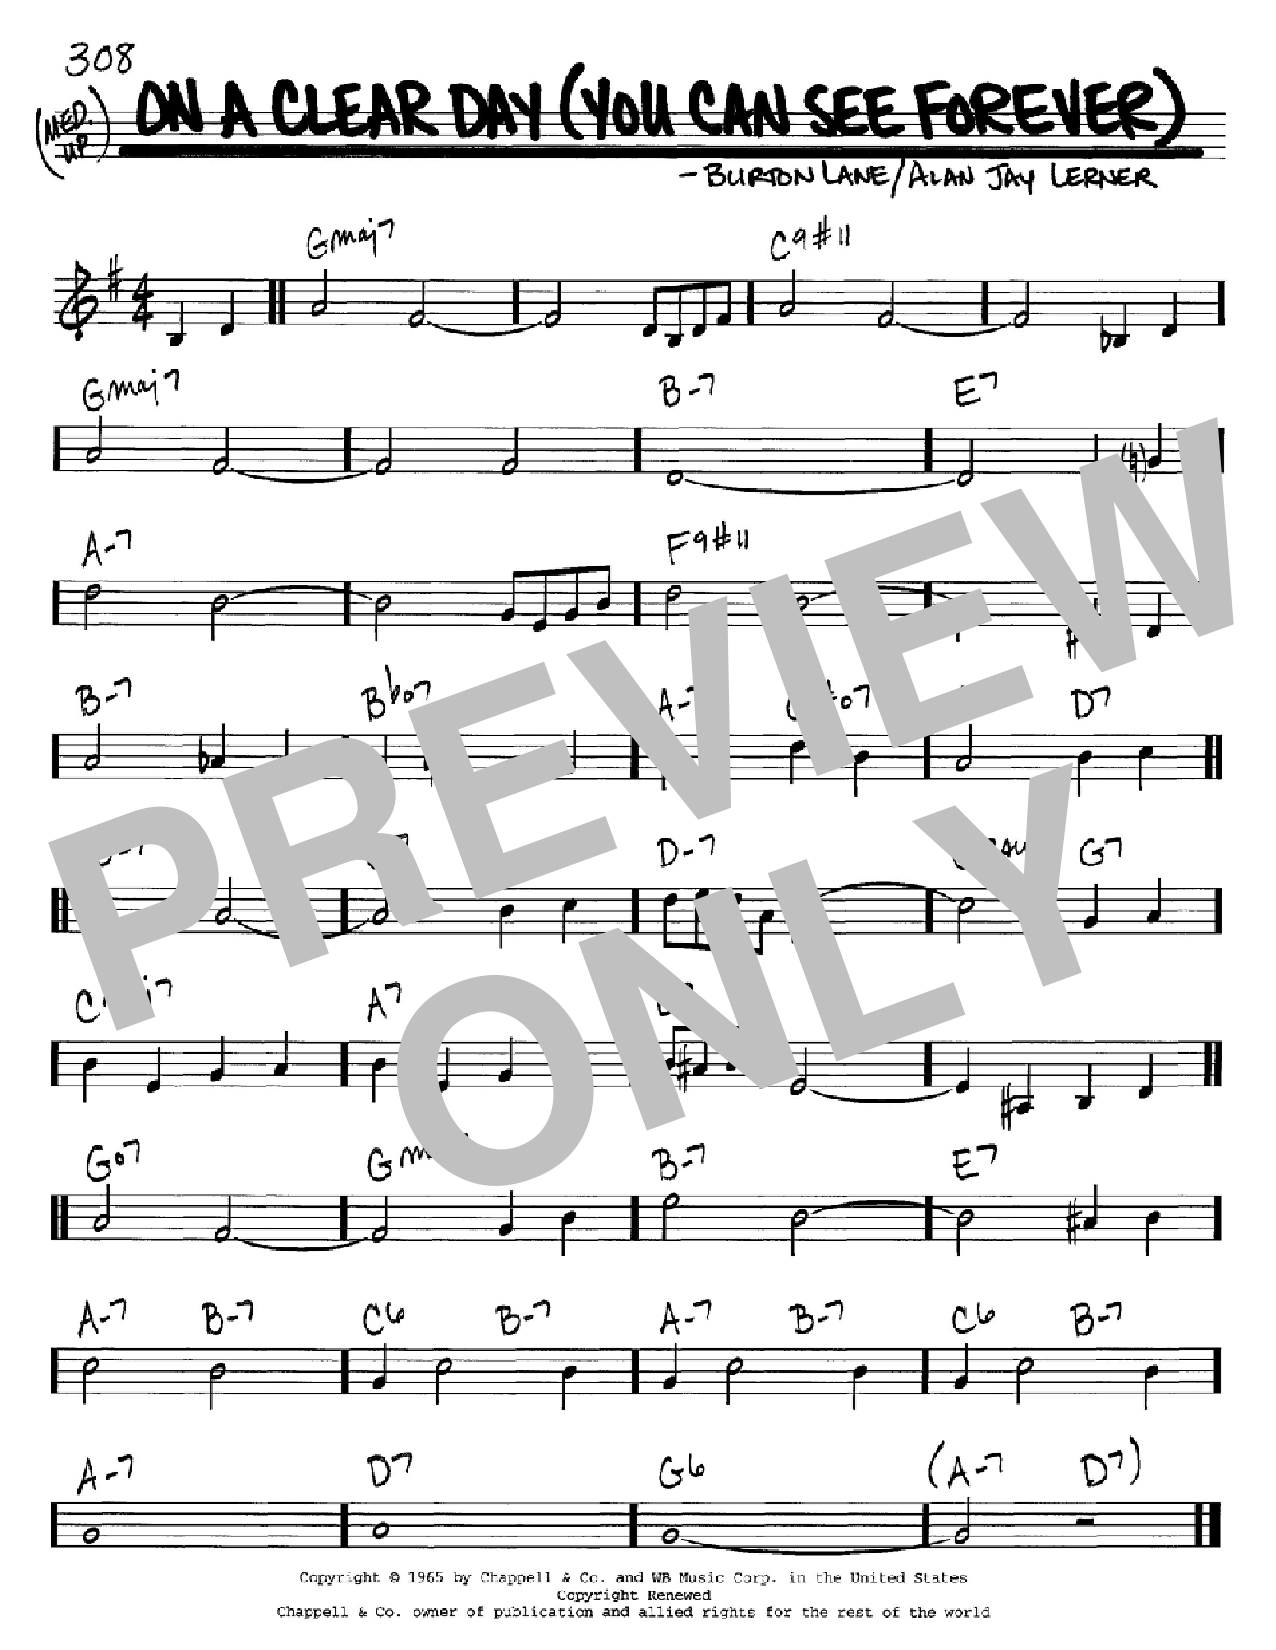 Download Alan Jay Lerner On A Clear Day (You Can See Forever) Sheet Music